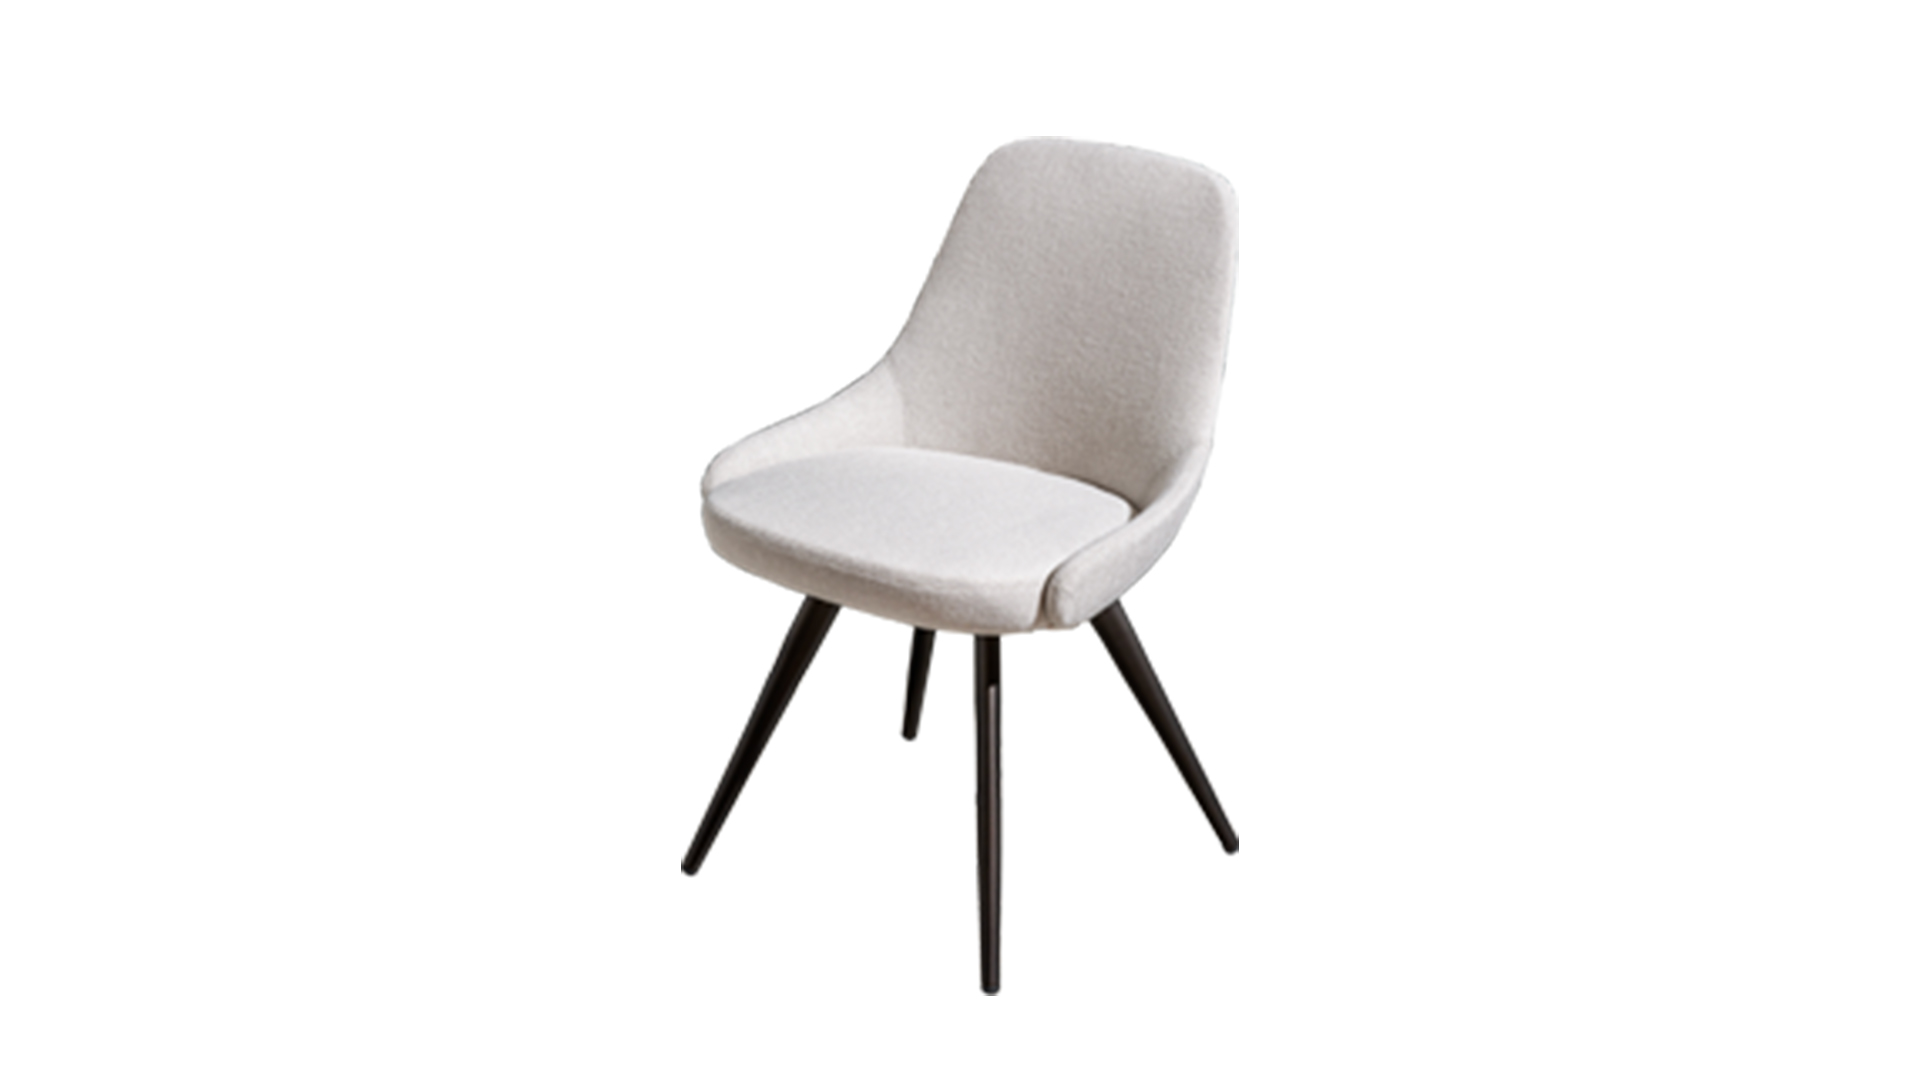 Cadira S coned shaped chair 03 (Website)